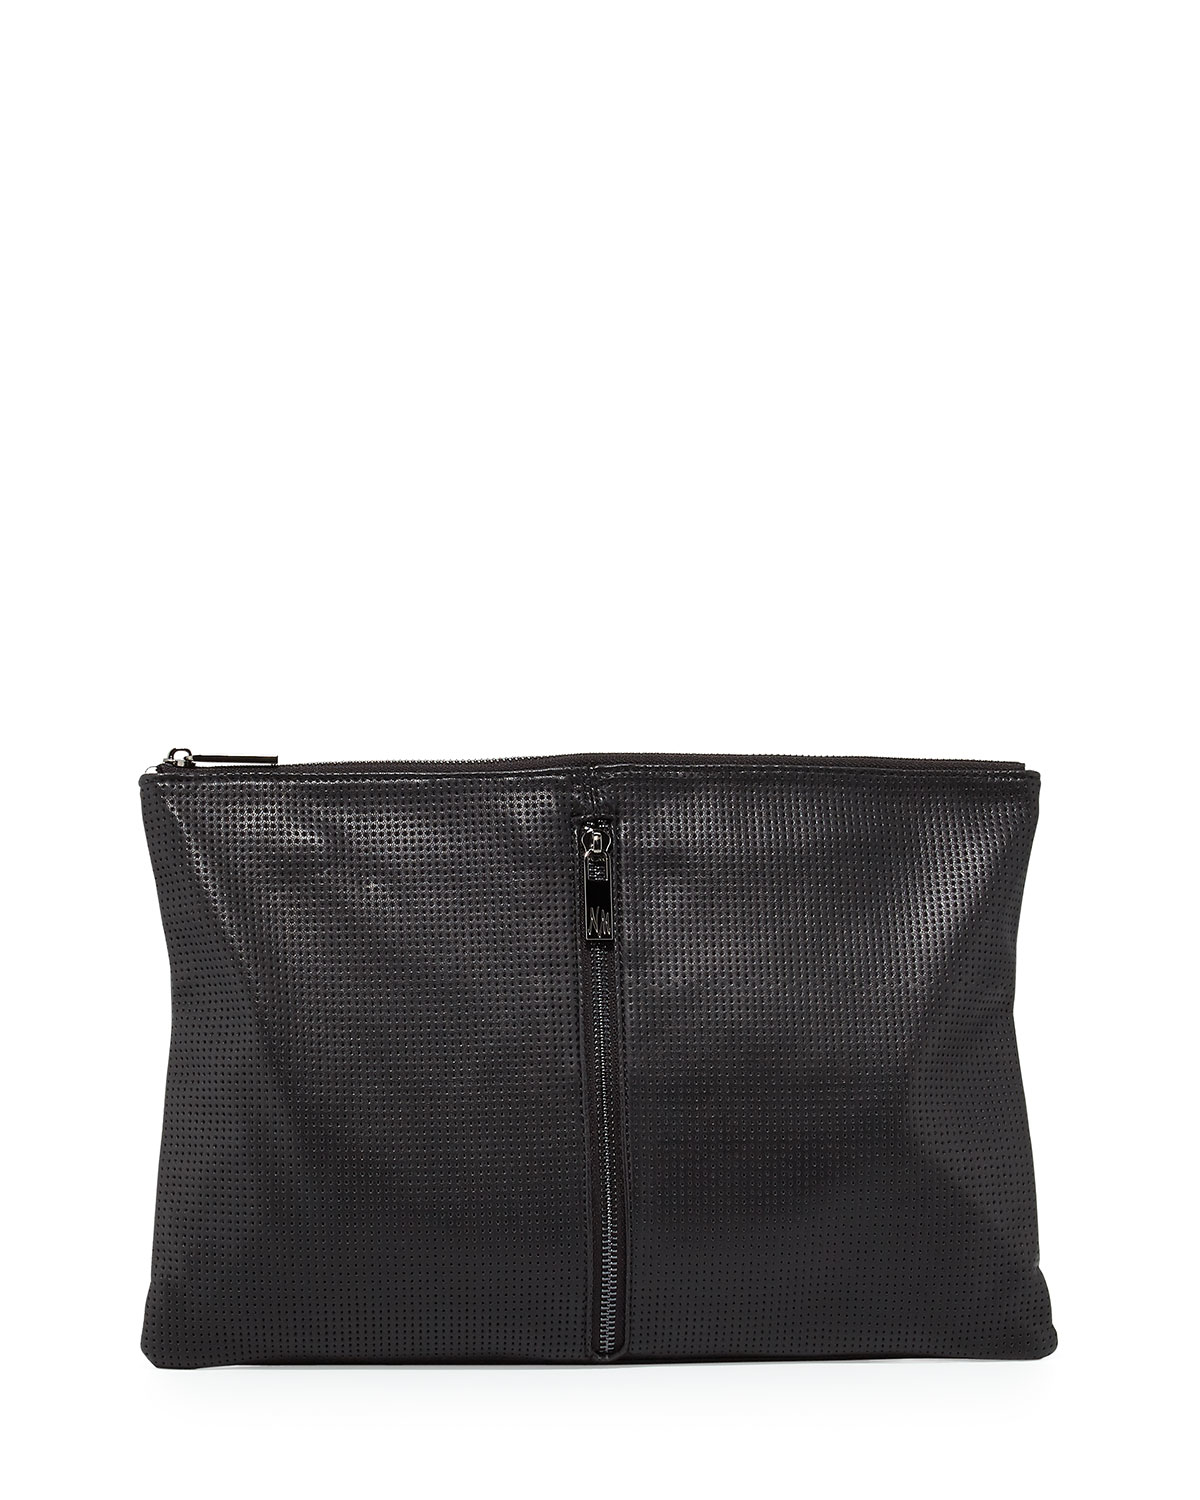 Lyst - Neiman Marcus Perforated Zip Large Clutch Bag in Black